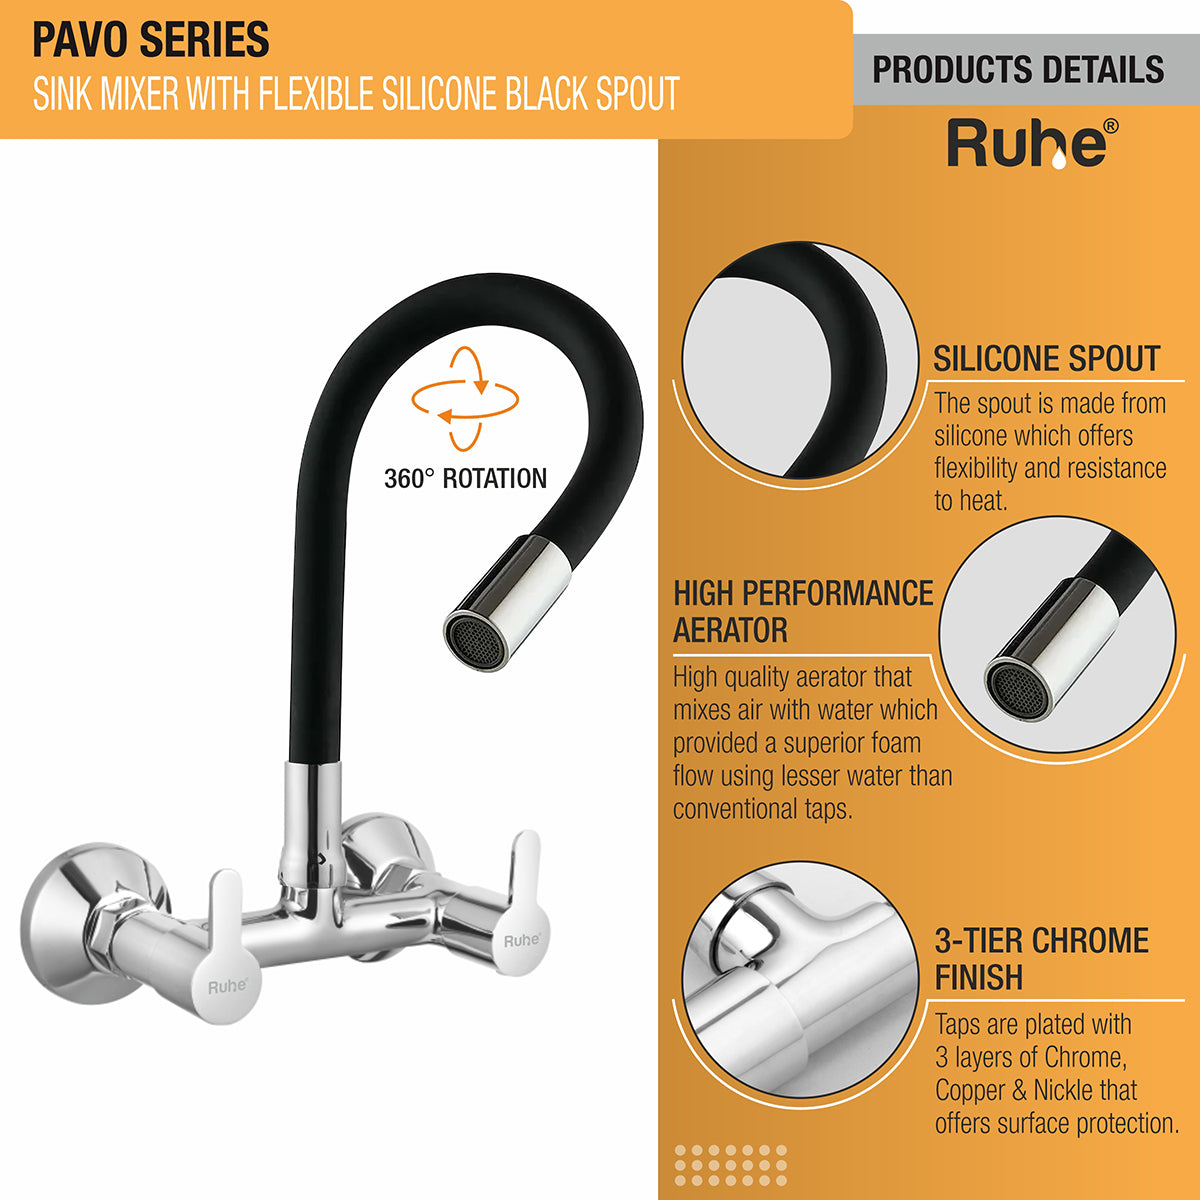 Pavo Sink Mixer Brass Faucet with Flexible Silicone Black Spout product details like silicone spout, high quality aerator, 3 layer protection